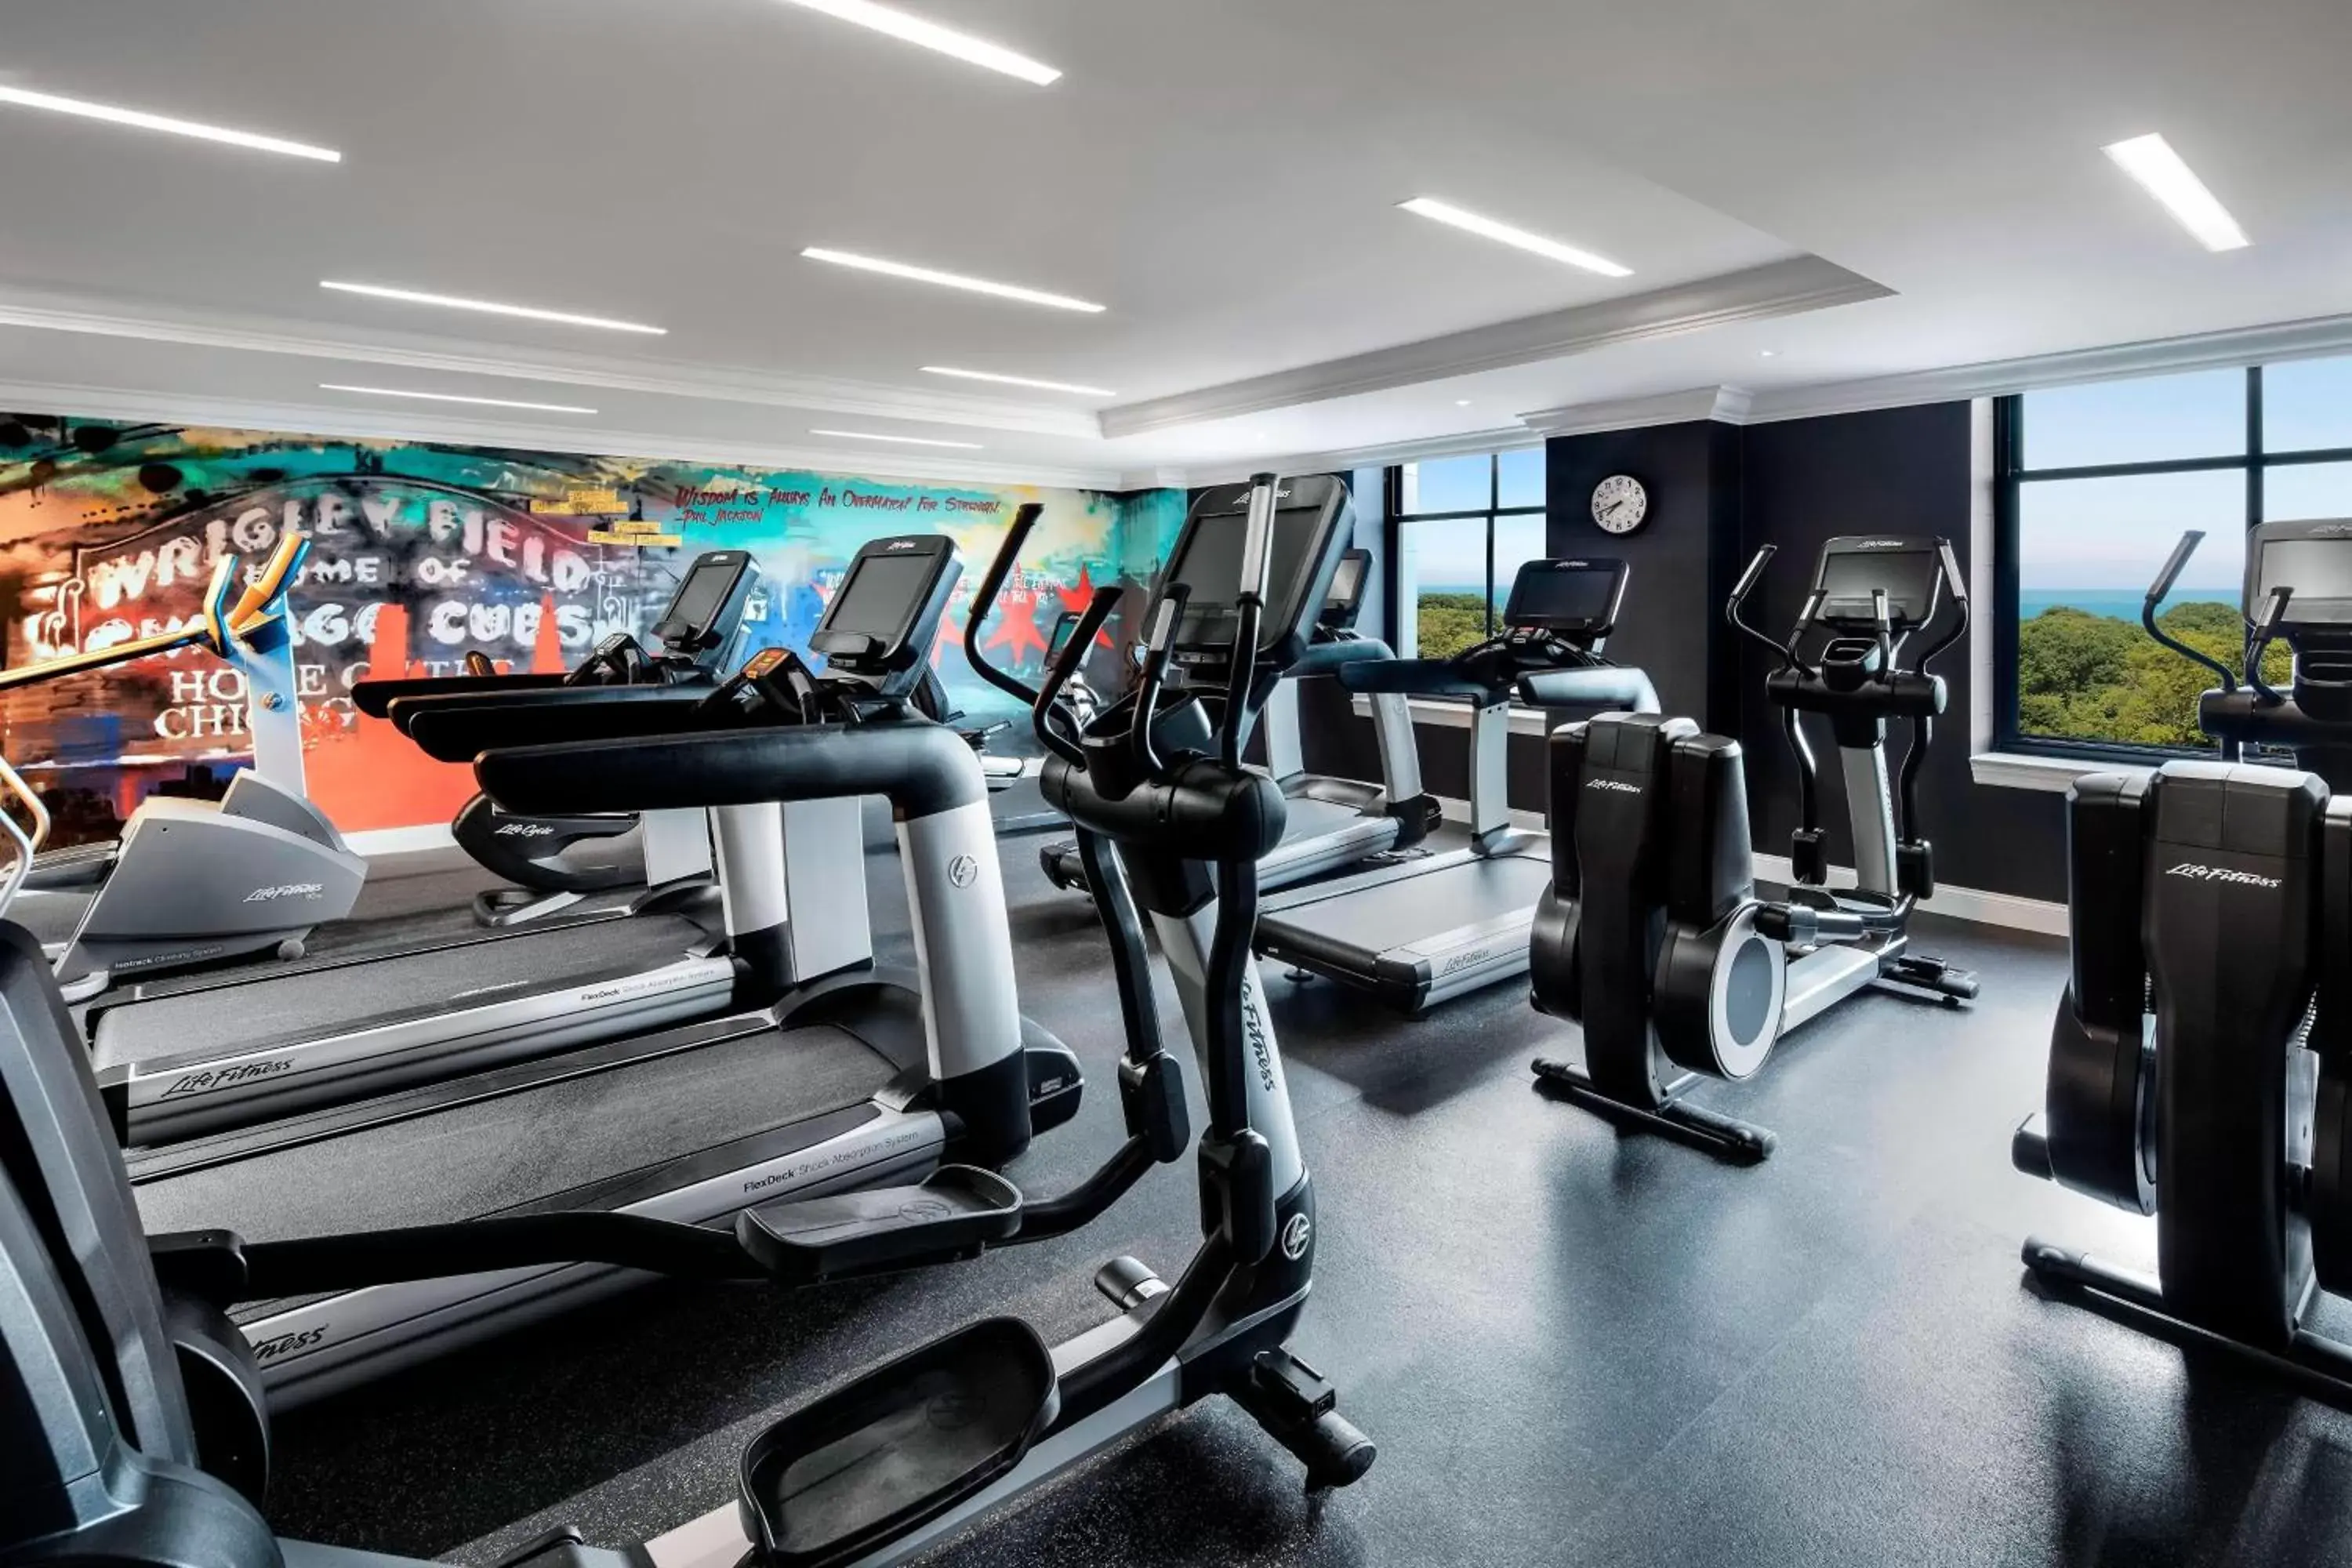 Fitness centre/facilities, Fitness Center/Facilities in The Blackstone, Autograph Collection